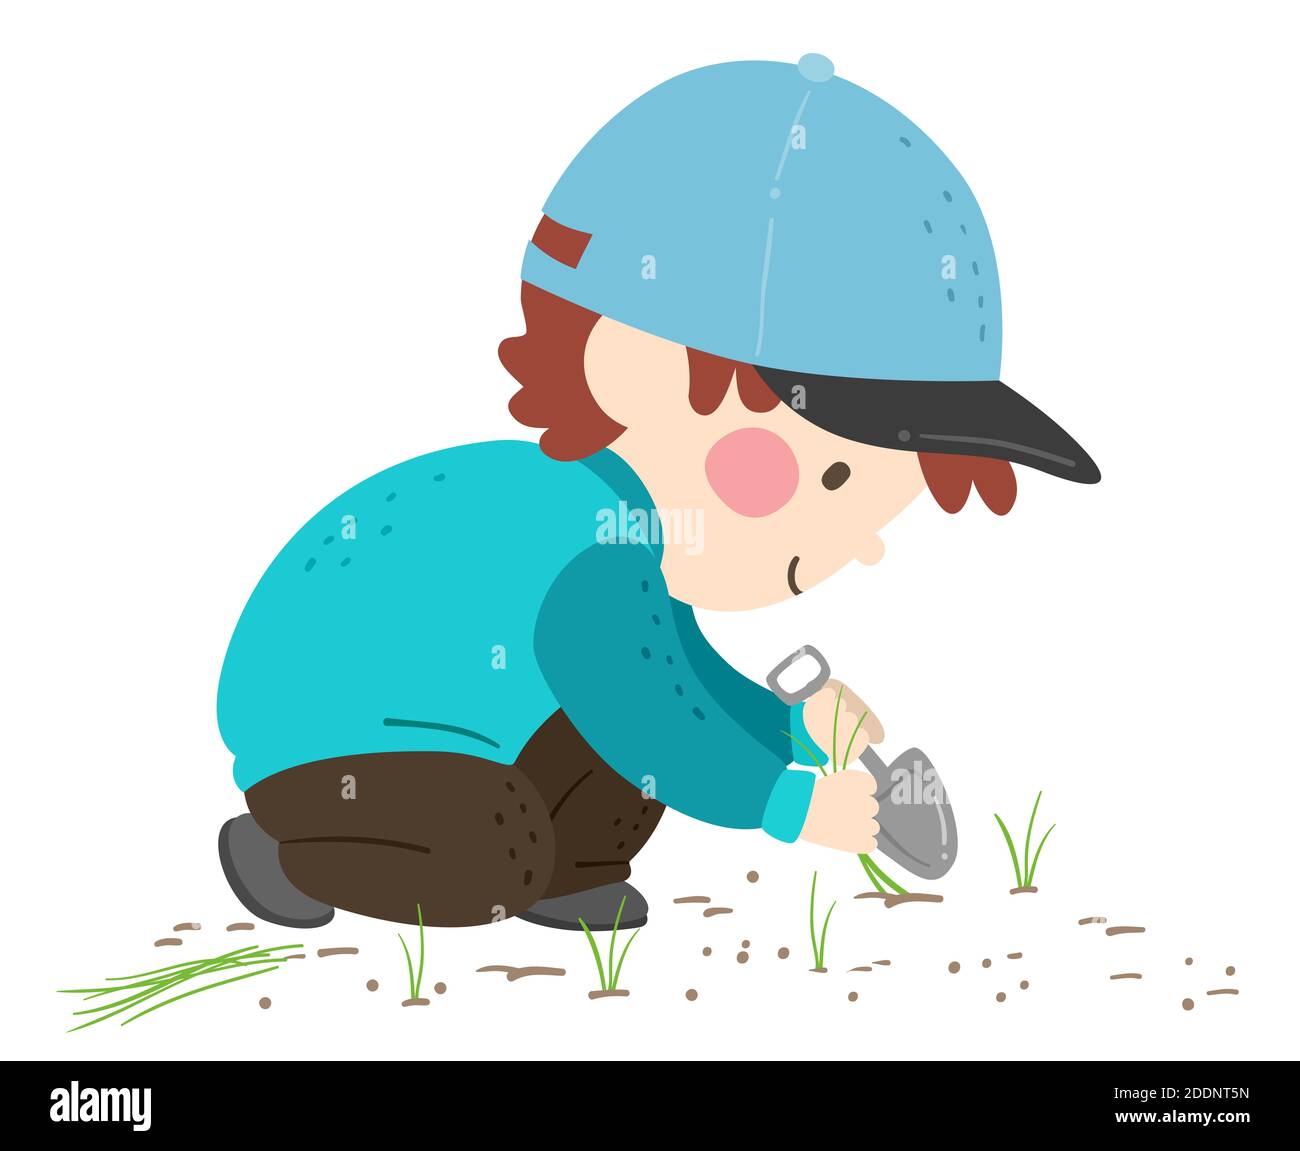 Illustration of a Kid Boy Holding Shovel and Removing Weeds from the Garden Stock Photo